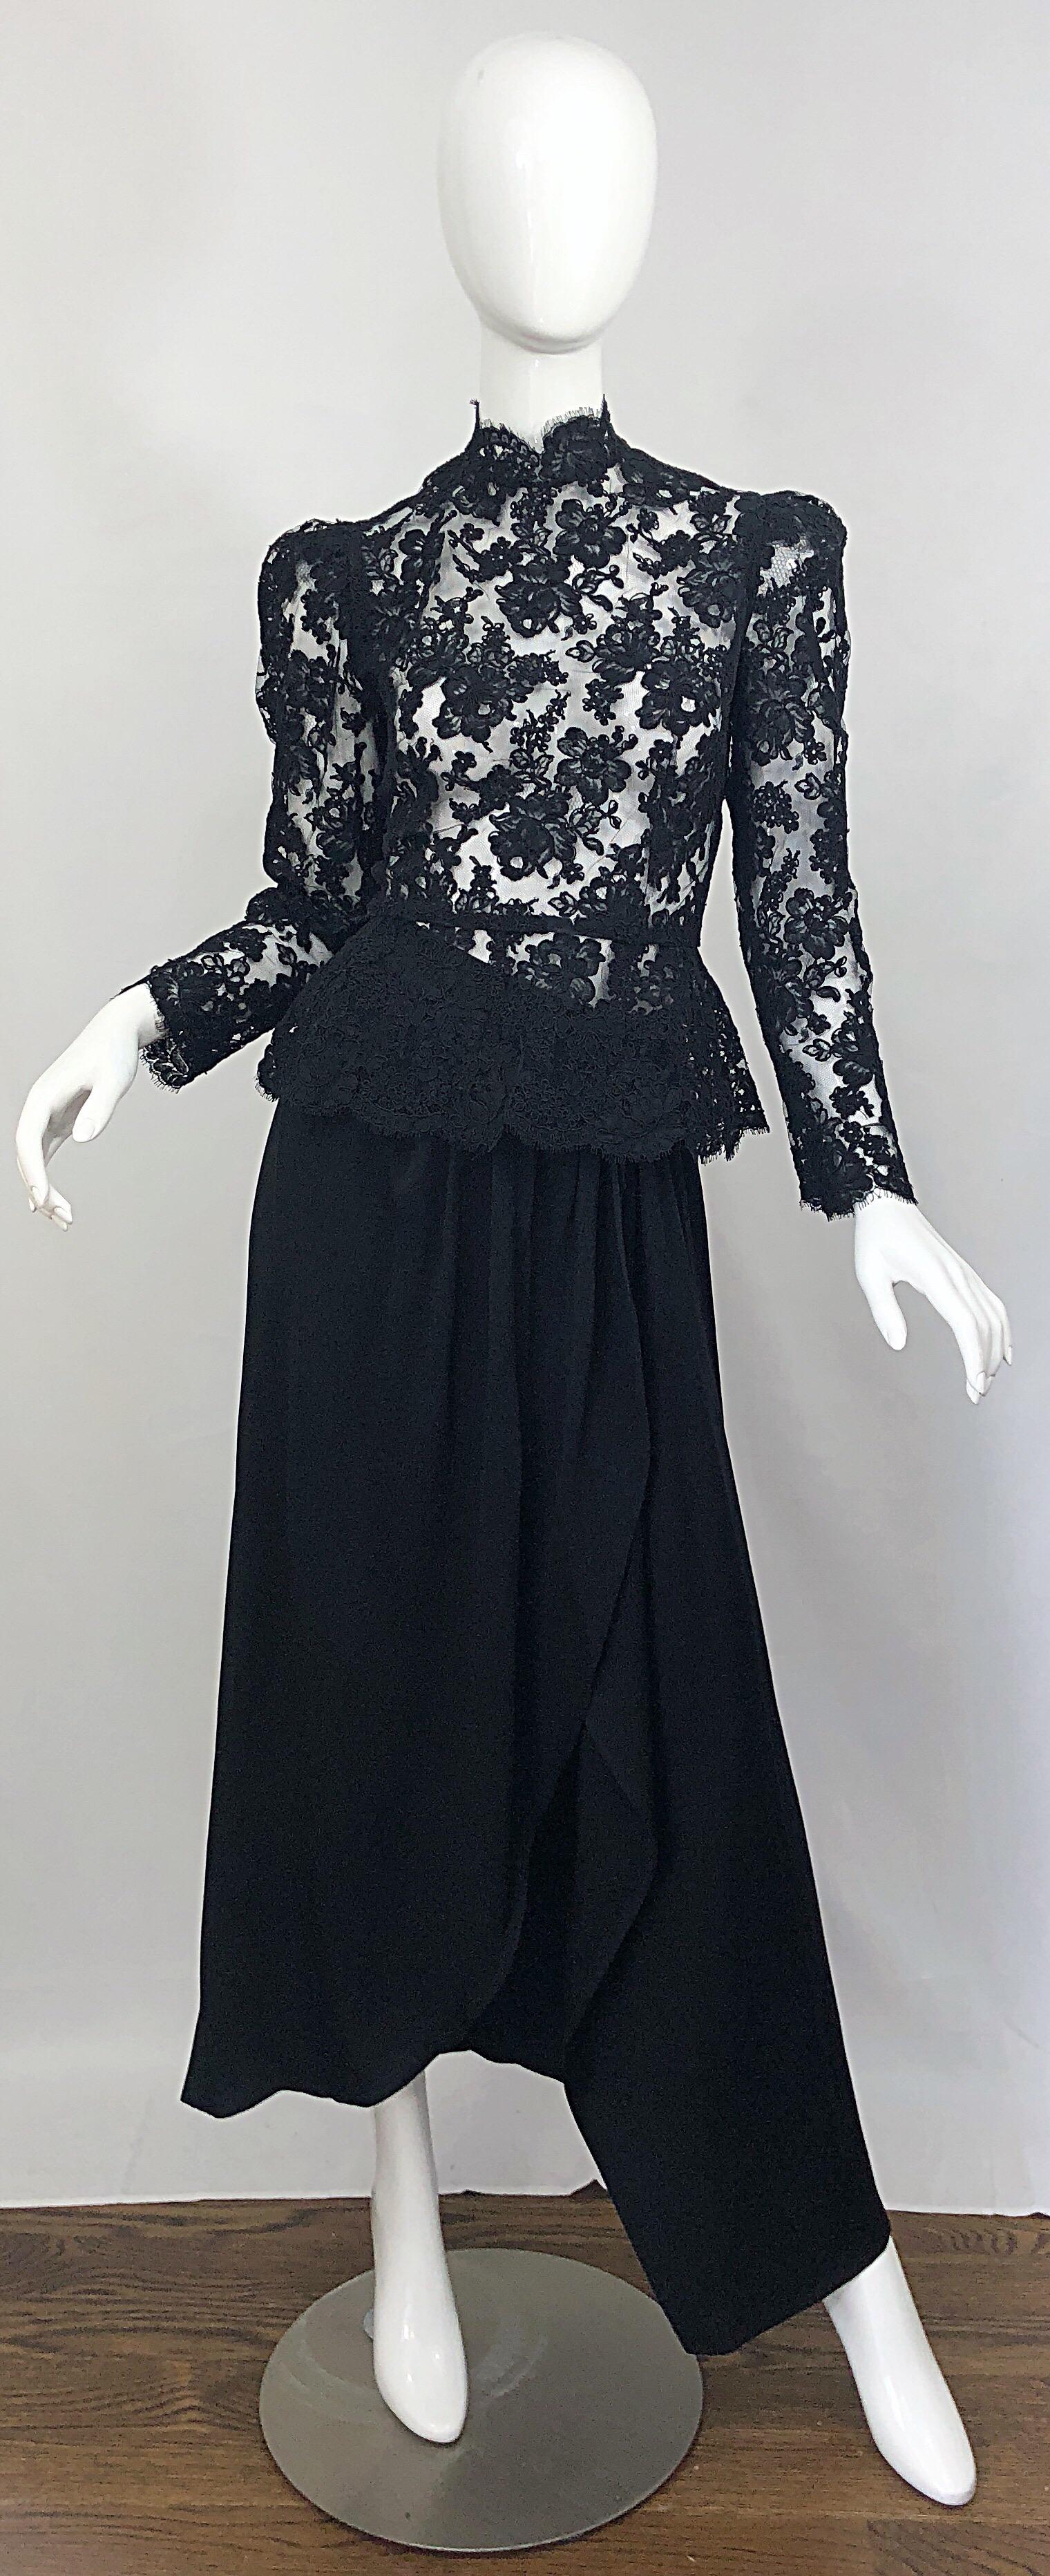 Incredible vintage 80s VICKY TIEL COUTURE black lace and rayon semi sheer blouse and asymmetrical maxi skirt evening gown. ensemble! Victorian inspired lace top features puff sleeves, with an elegant high neck. Full hidden zipper up the back with